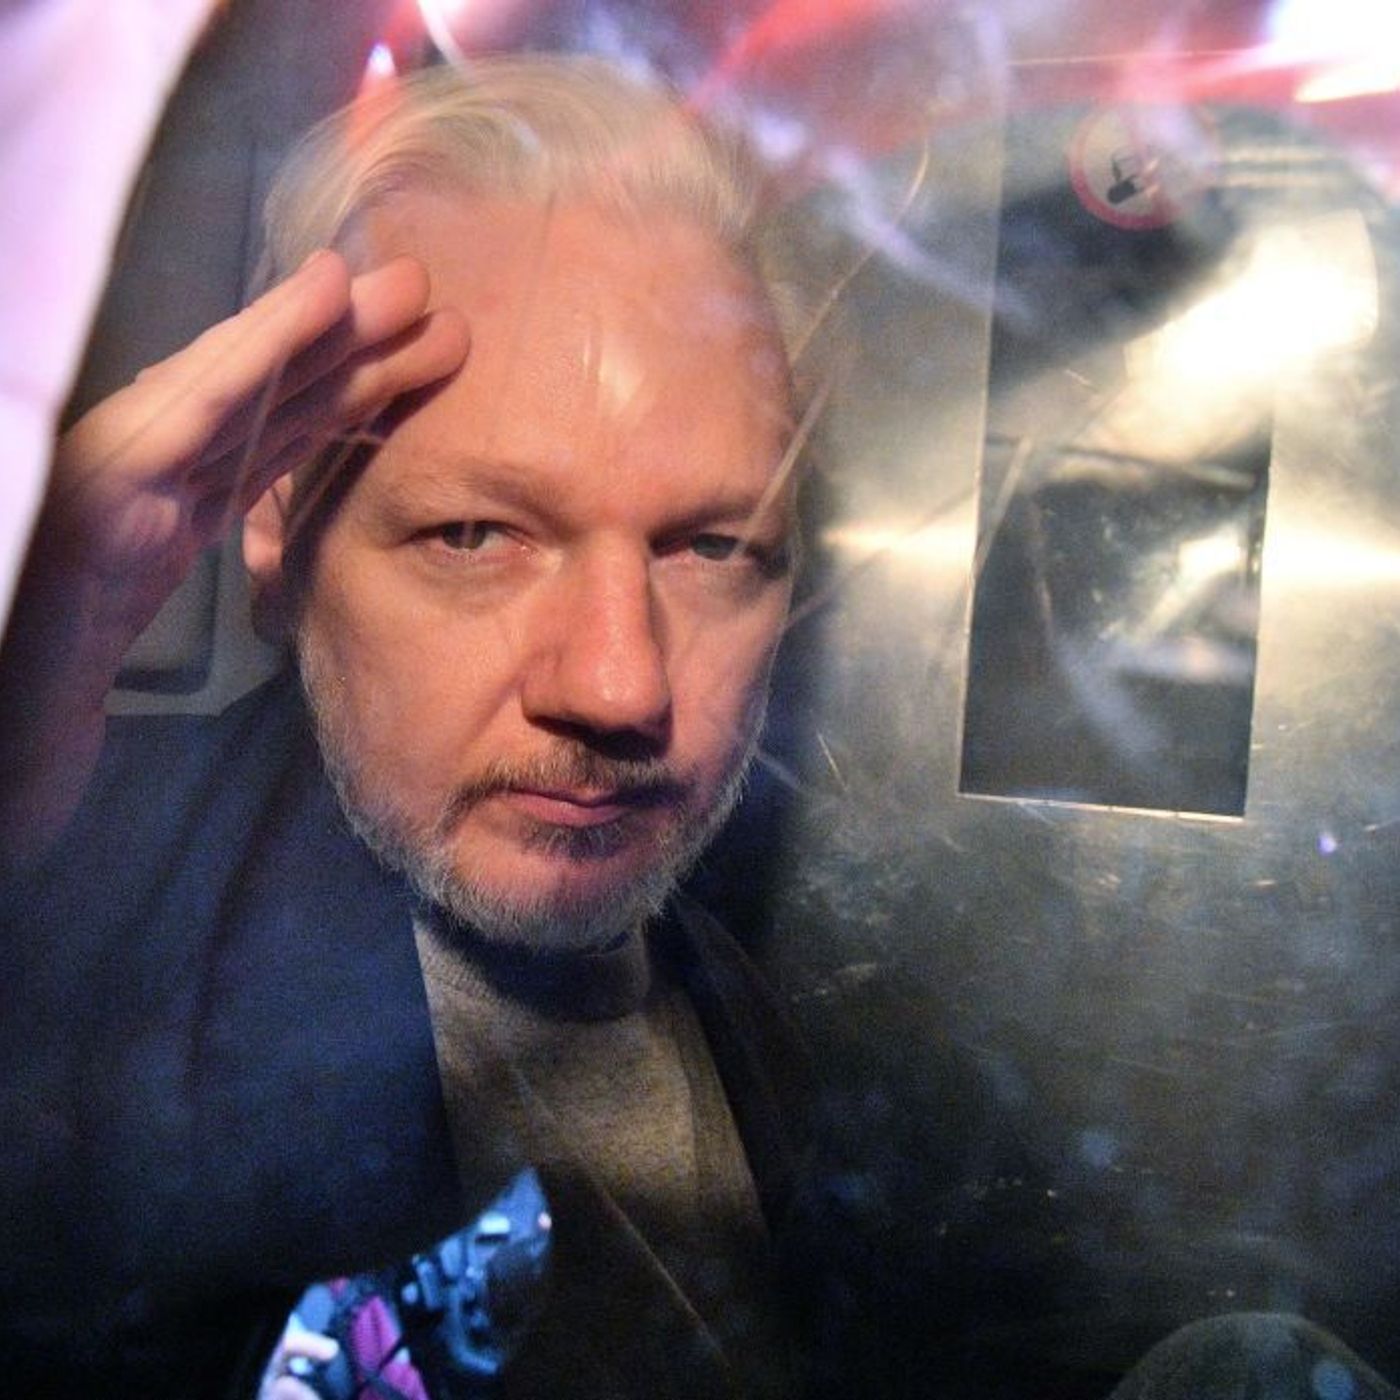 Americano: should Julian Assange be extradited to America?